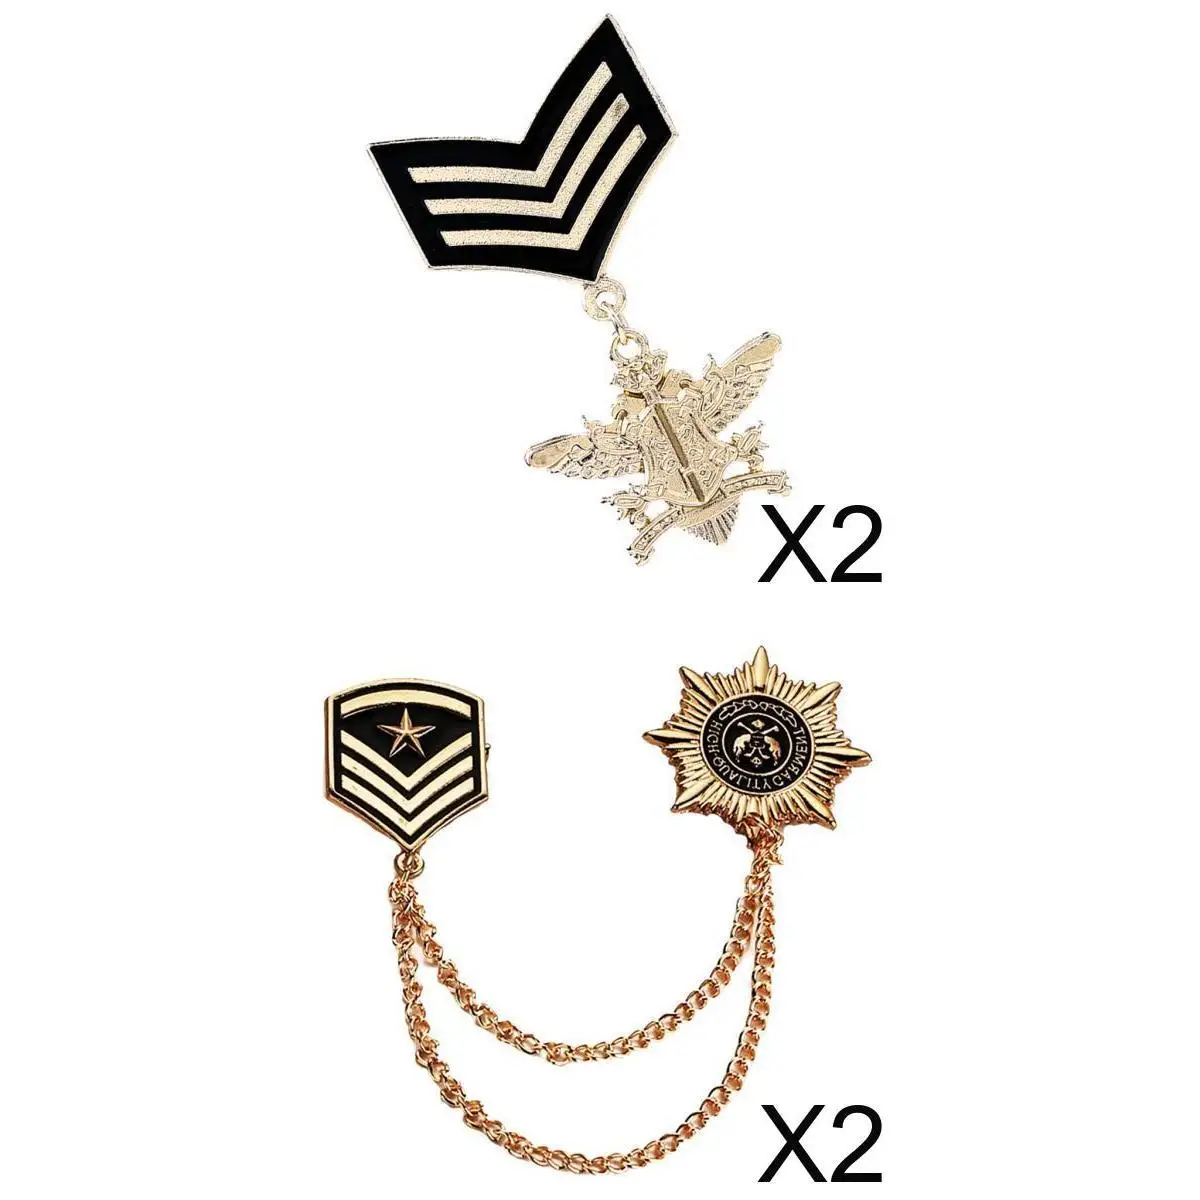 Retro  Brooch  Pin Lapel Pin  with  Decoration + Retro Alloy Chain Brooch with